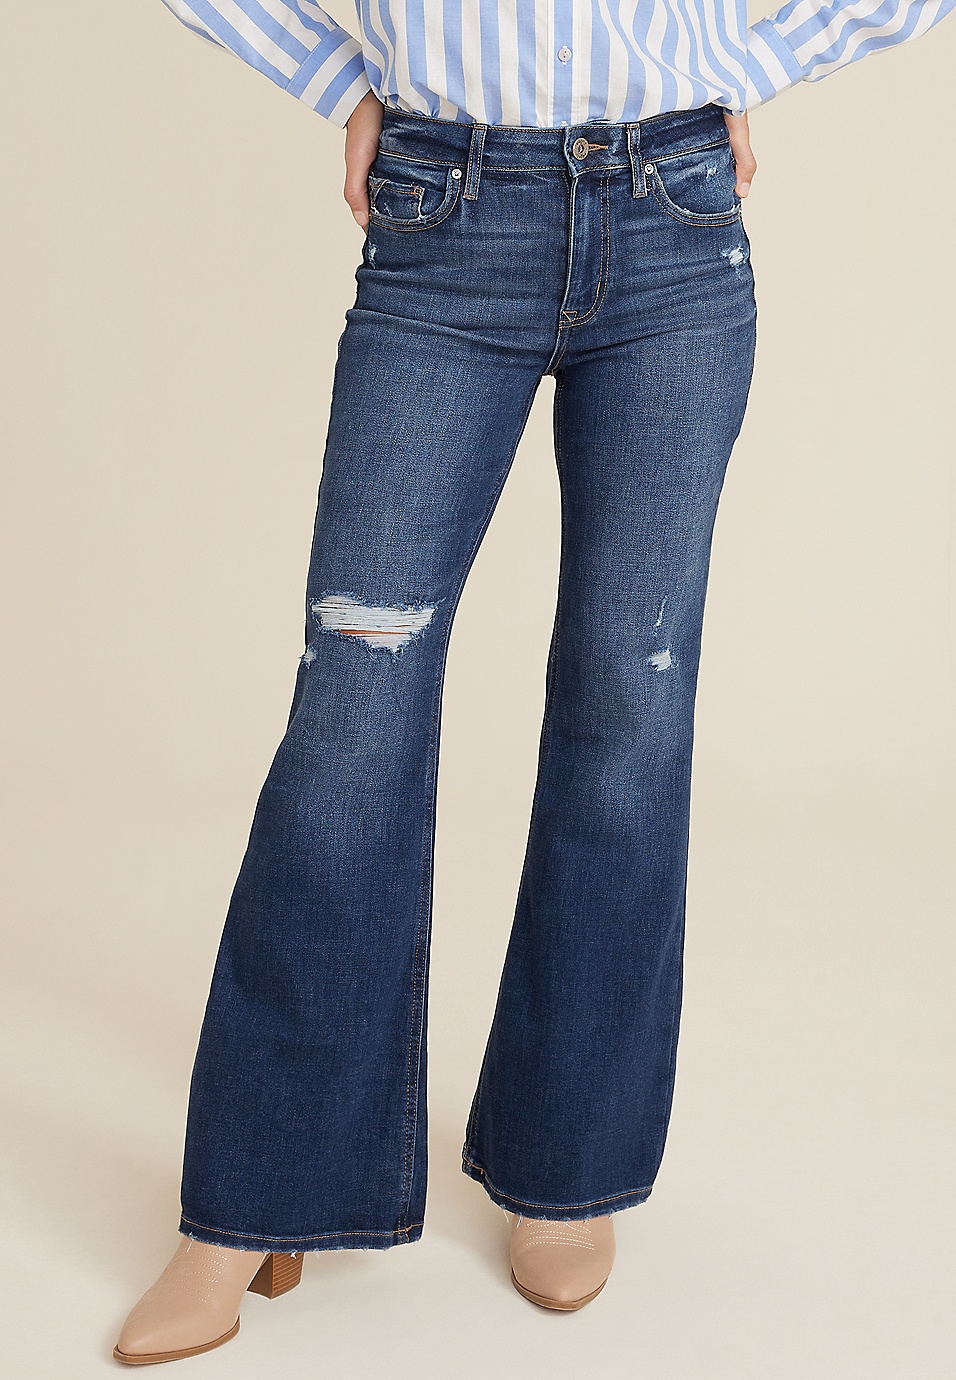 edgely™ Super High Rise Ripped Relaxed Flare Jean